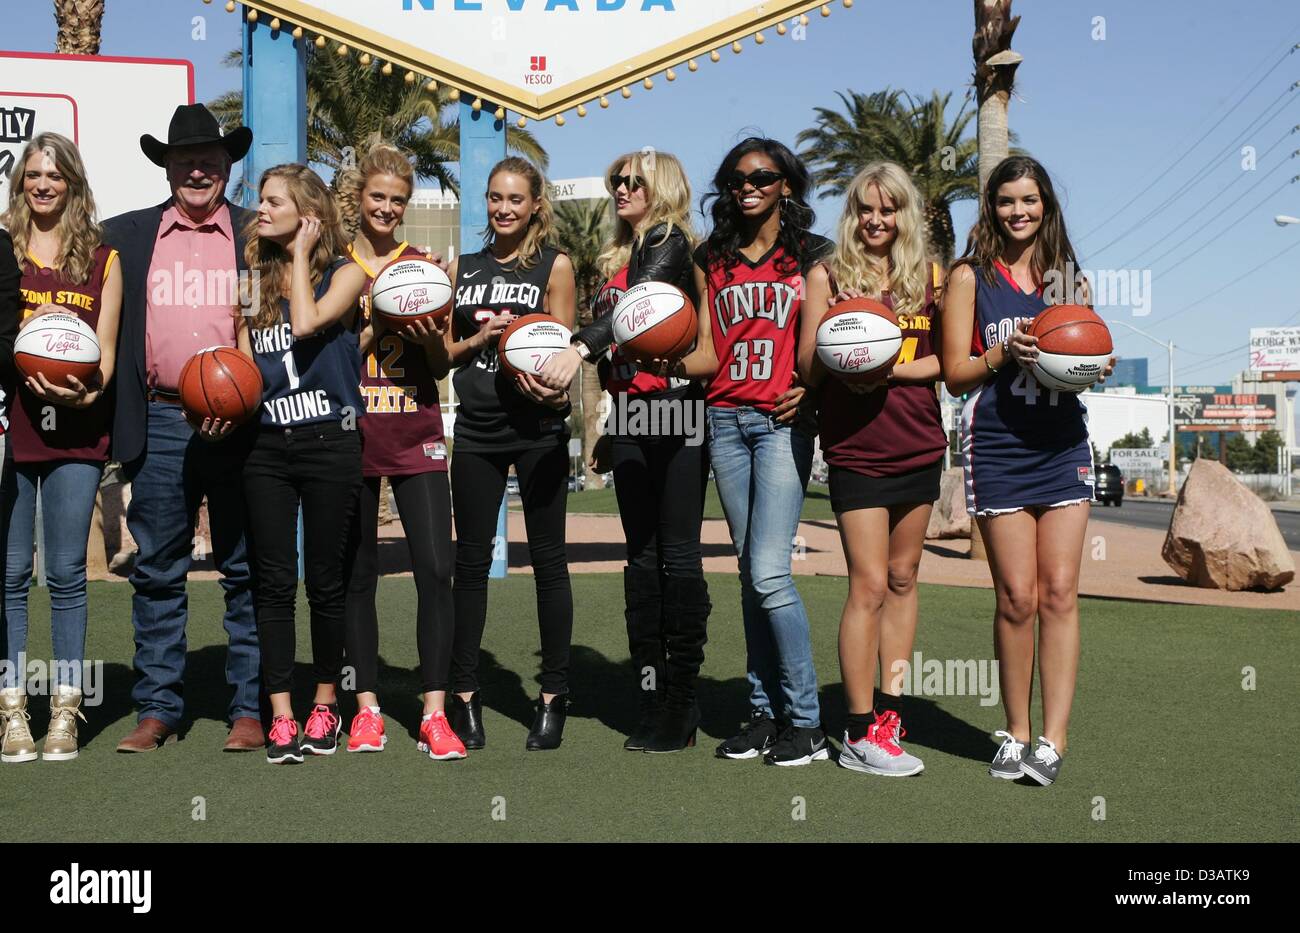 Las Vegas, Nevada, USA. 14th February 2013. Julie Henderson, Guest, Jessica Perez, Kate Bock, Hannah Davis, Kate Upton, Adaora, Genevieve Morton, Natasha Barnard at a public appearance for Sports Illustrated Swimsuit Issue Salutes NCAA Basketball Conference Championships, 'Welcome to Las Vegas' sign, Las Vegas, NV February 14, 2013. Photo By: James Atoa/Everett Collection/Alamy Live News Stock Photo